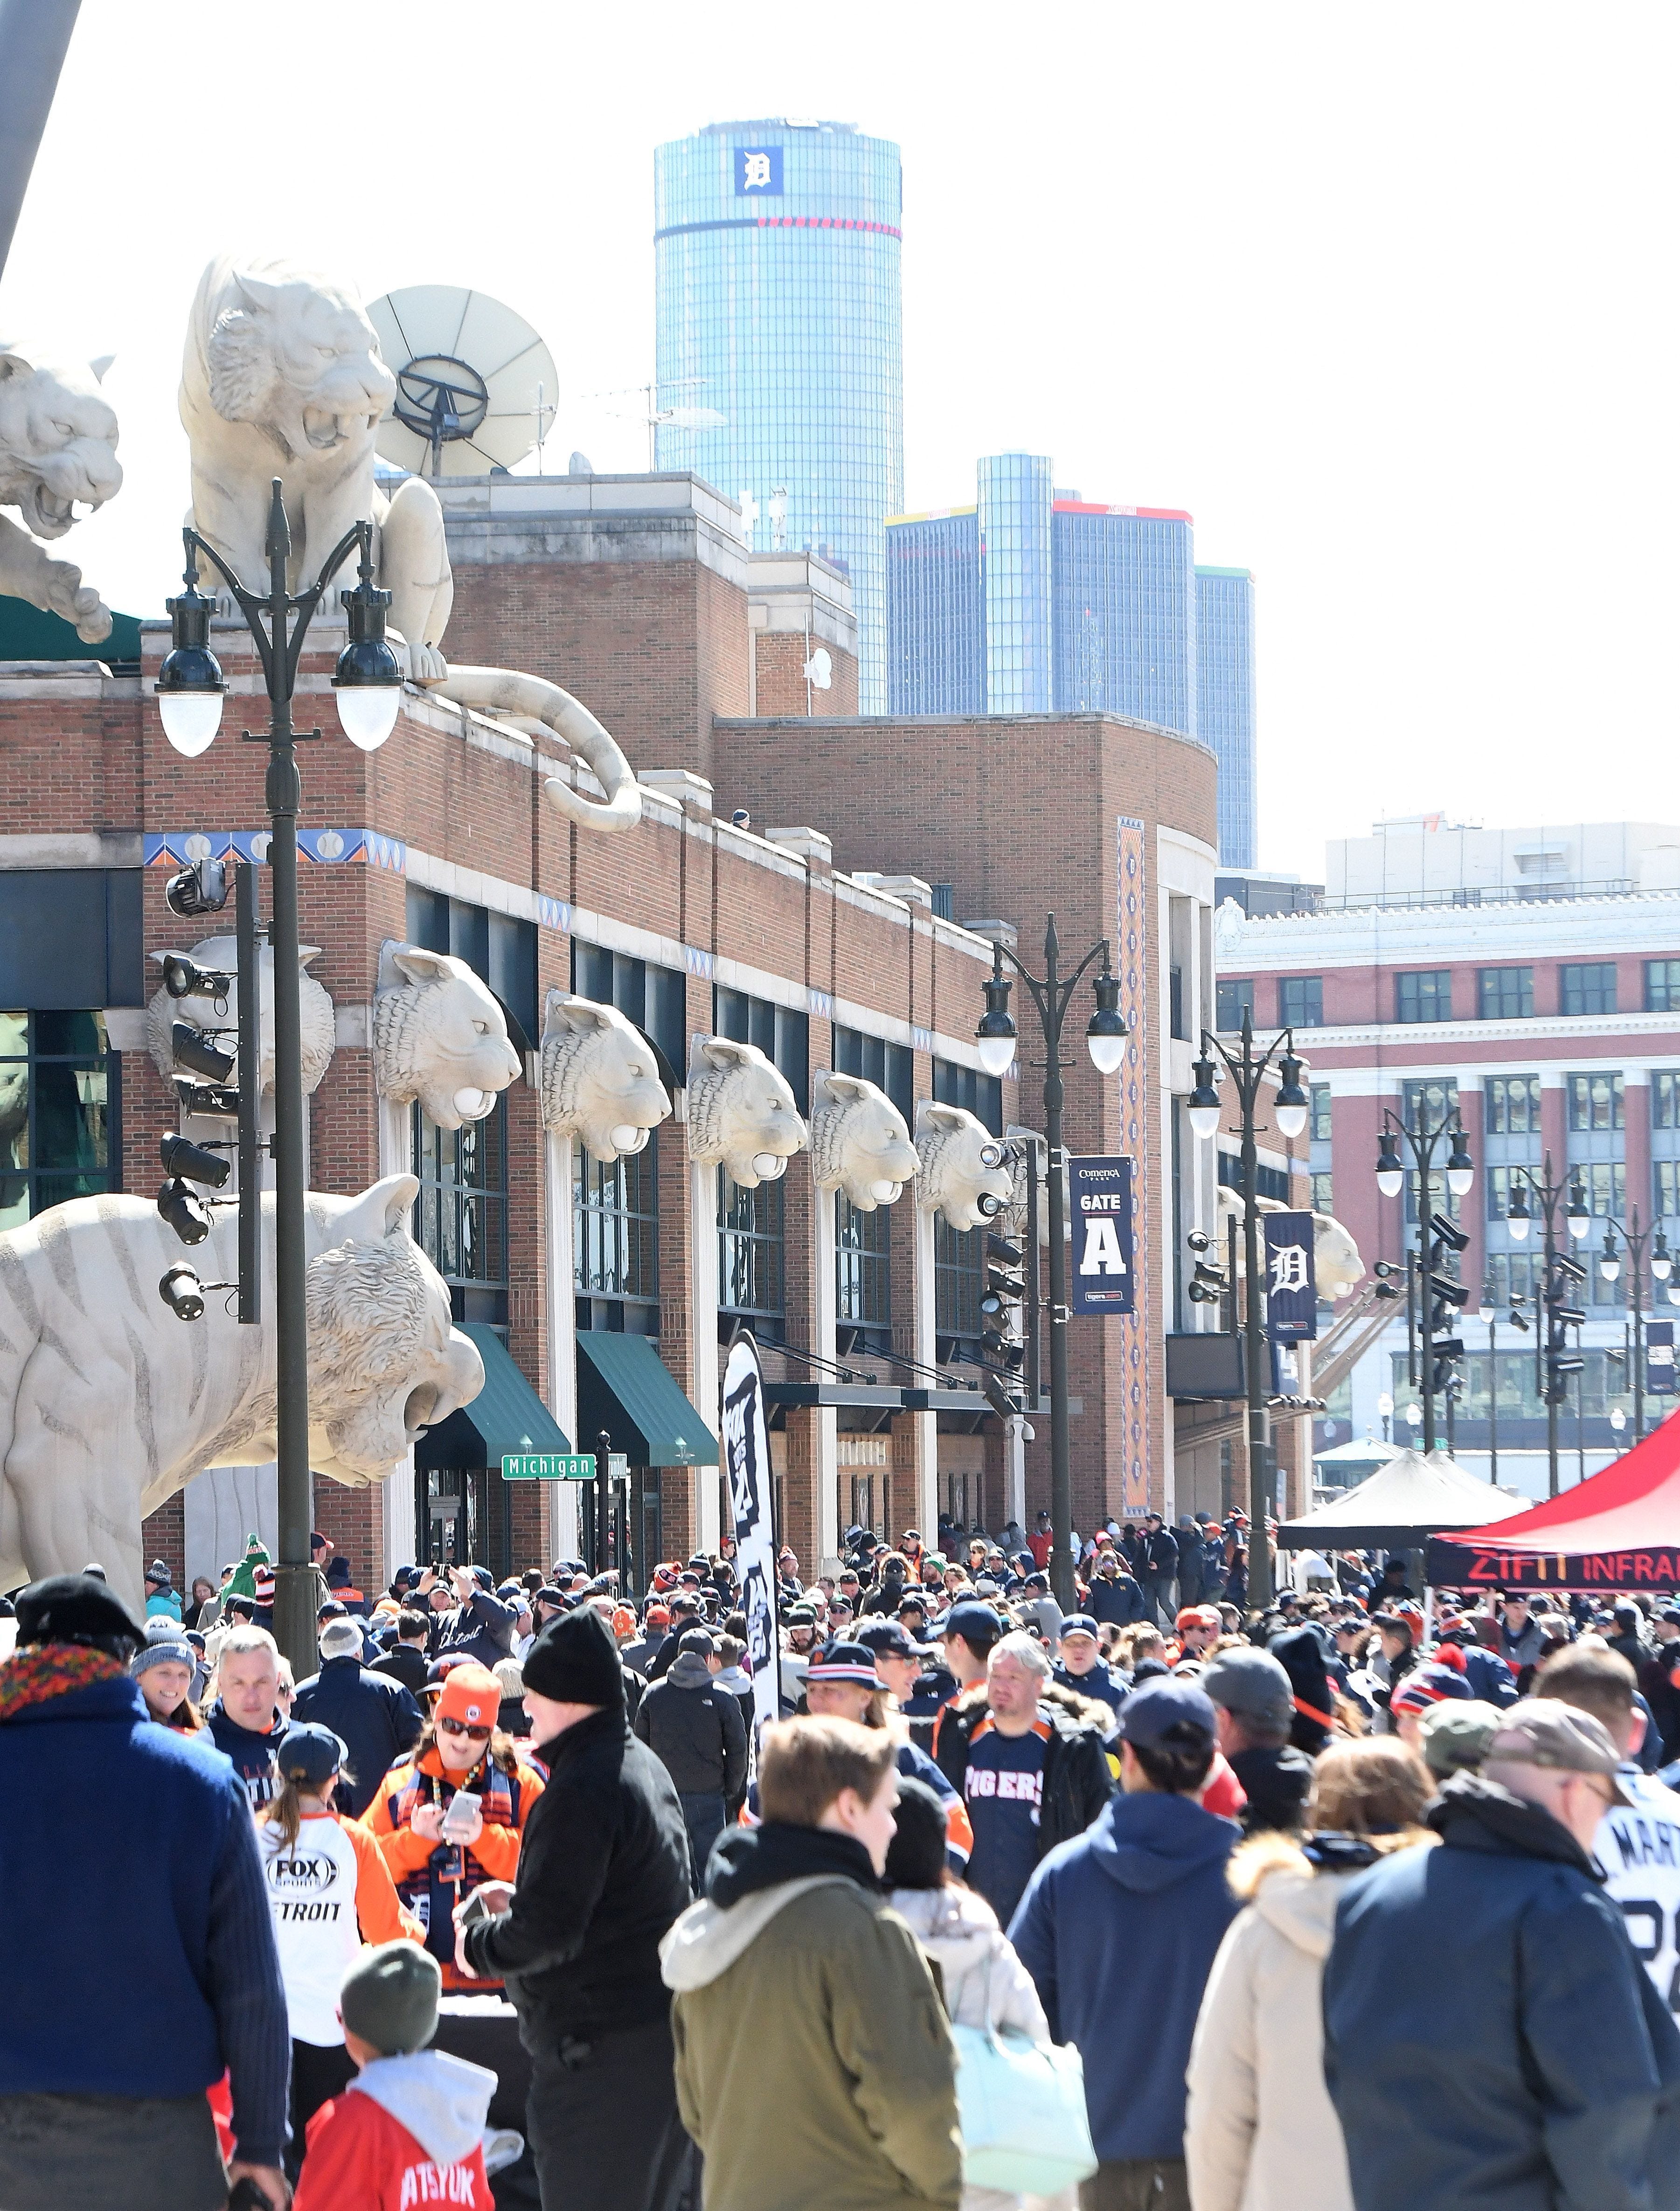 Detroit Tigers Opening Day brings fans out in droves.